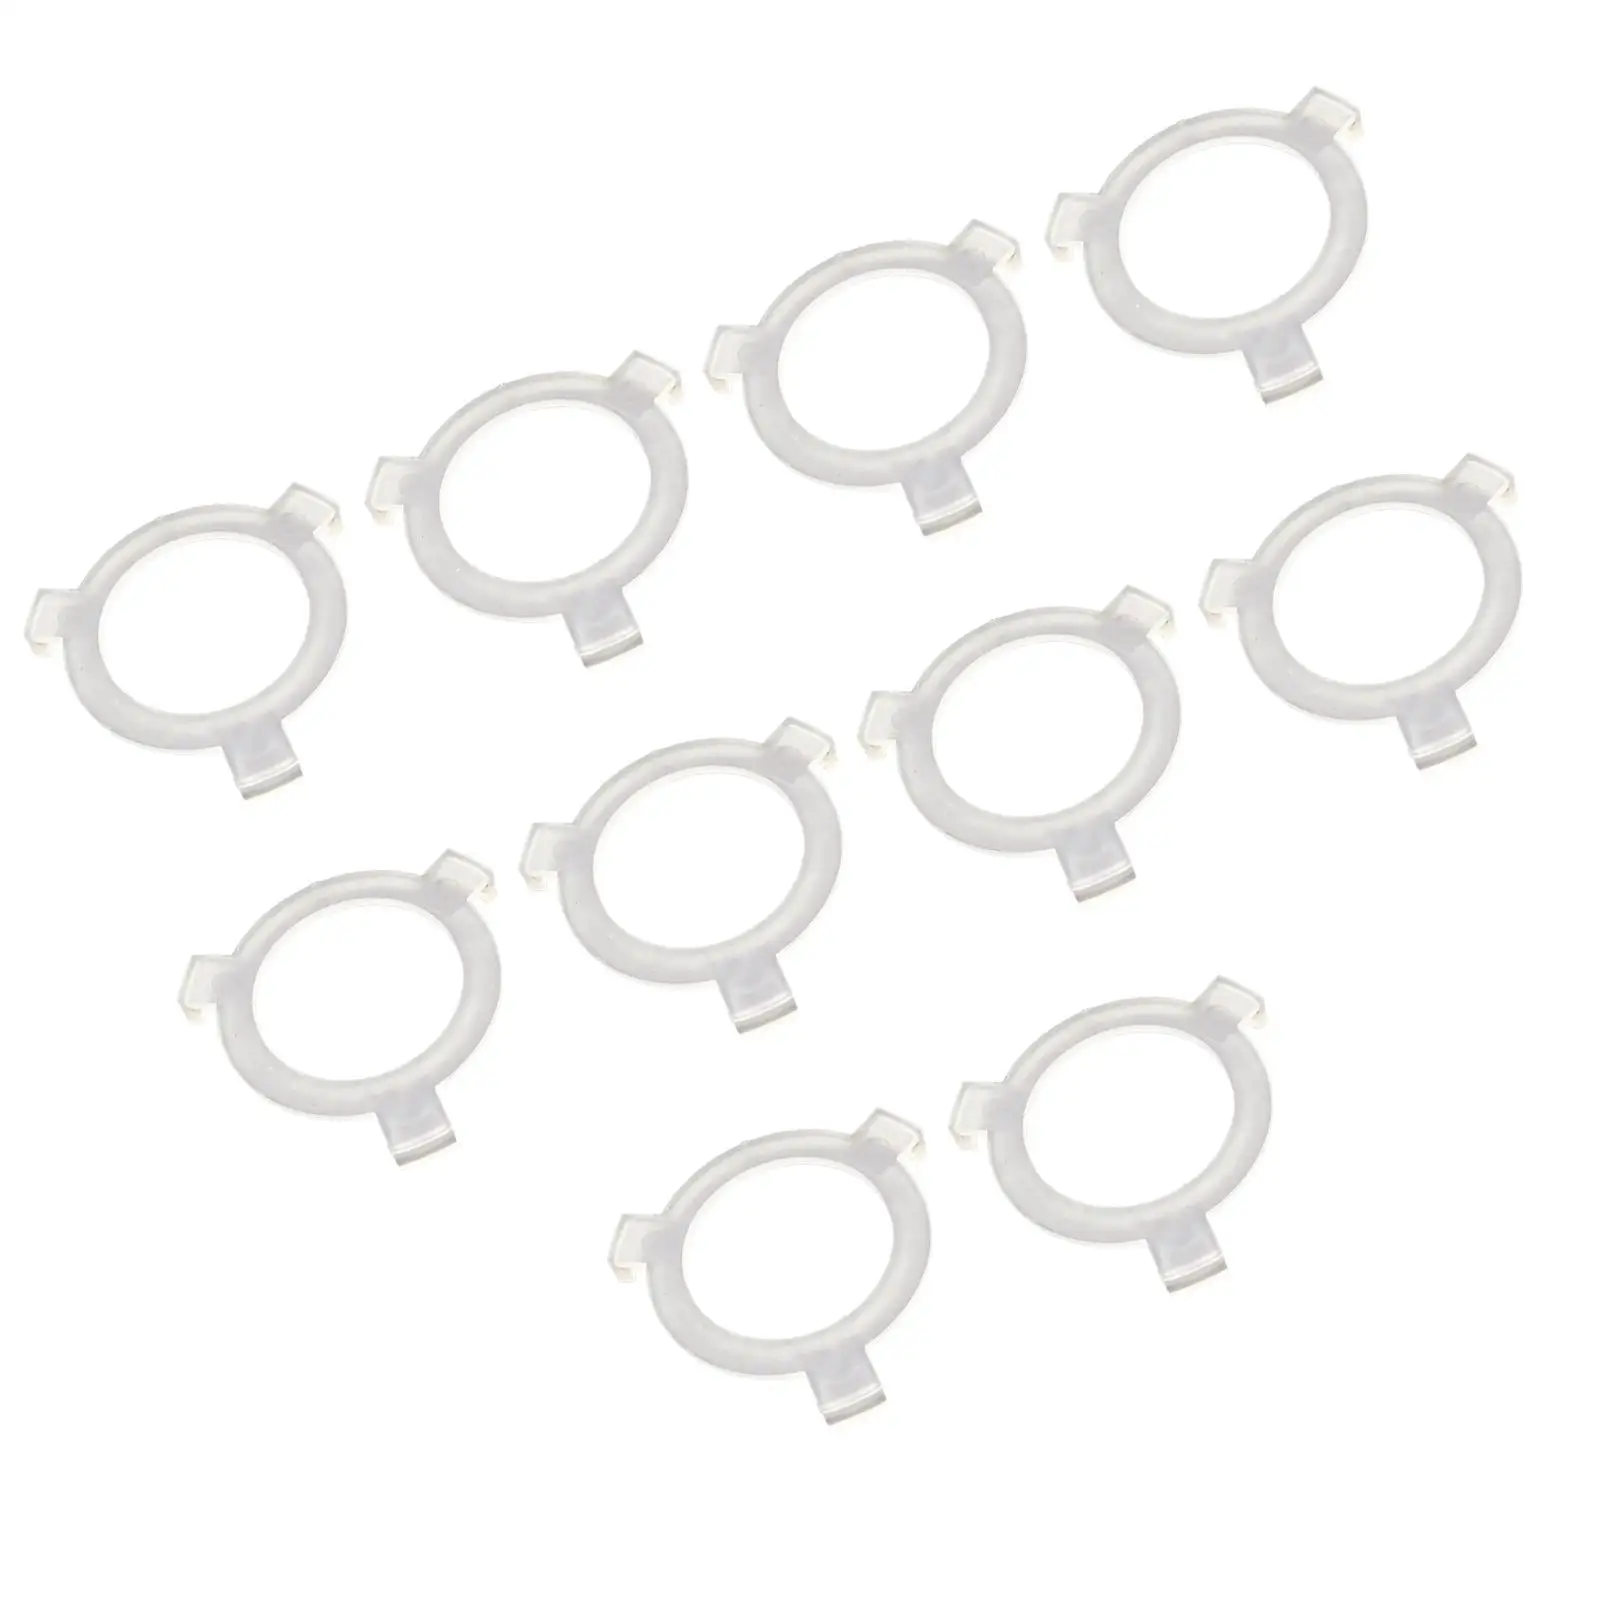 10 Pieces E27 to E26 Converters Lampshade Adapter Washer Bulb Socket Adapter